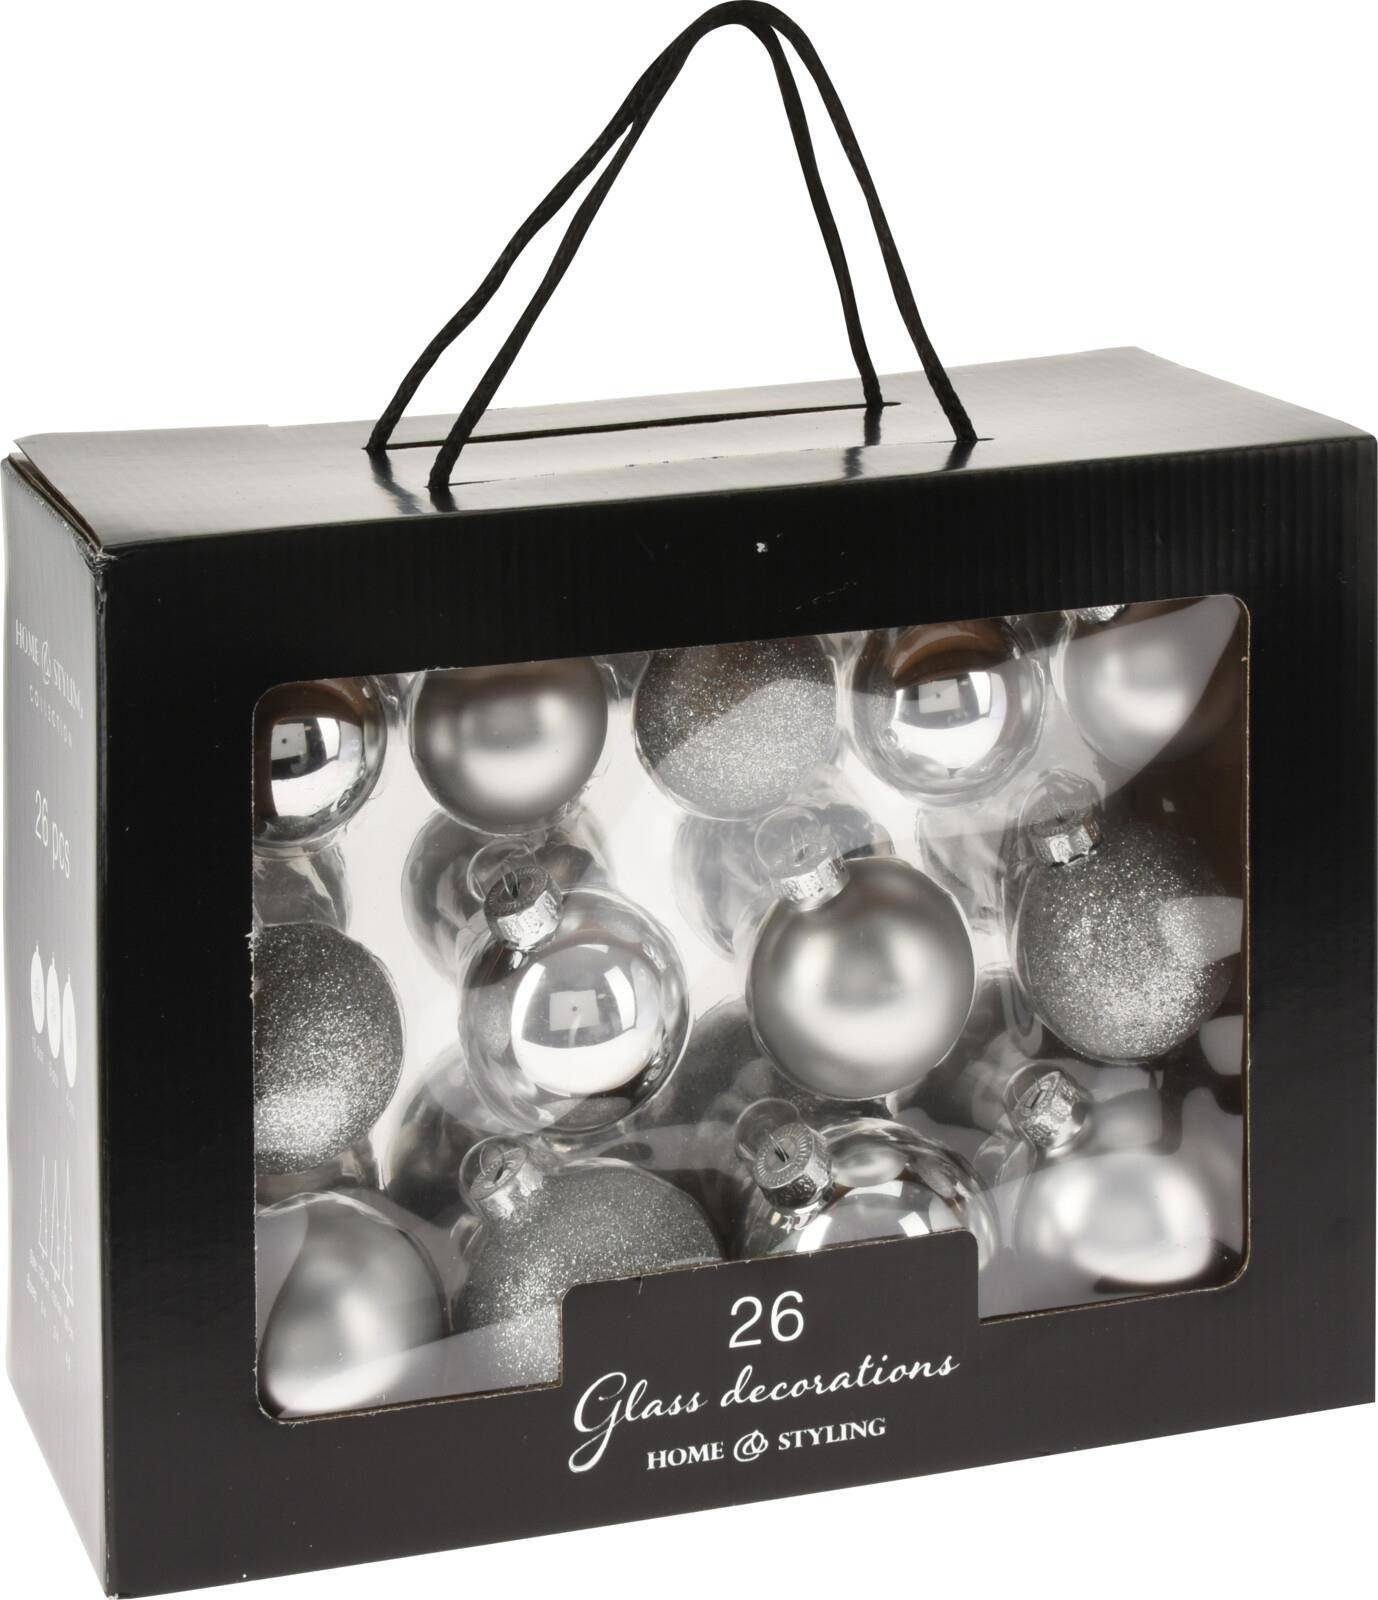 Home & styling collection Weihnachtsbaumkugel Silber